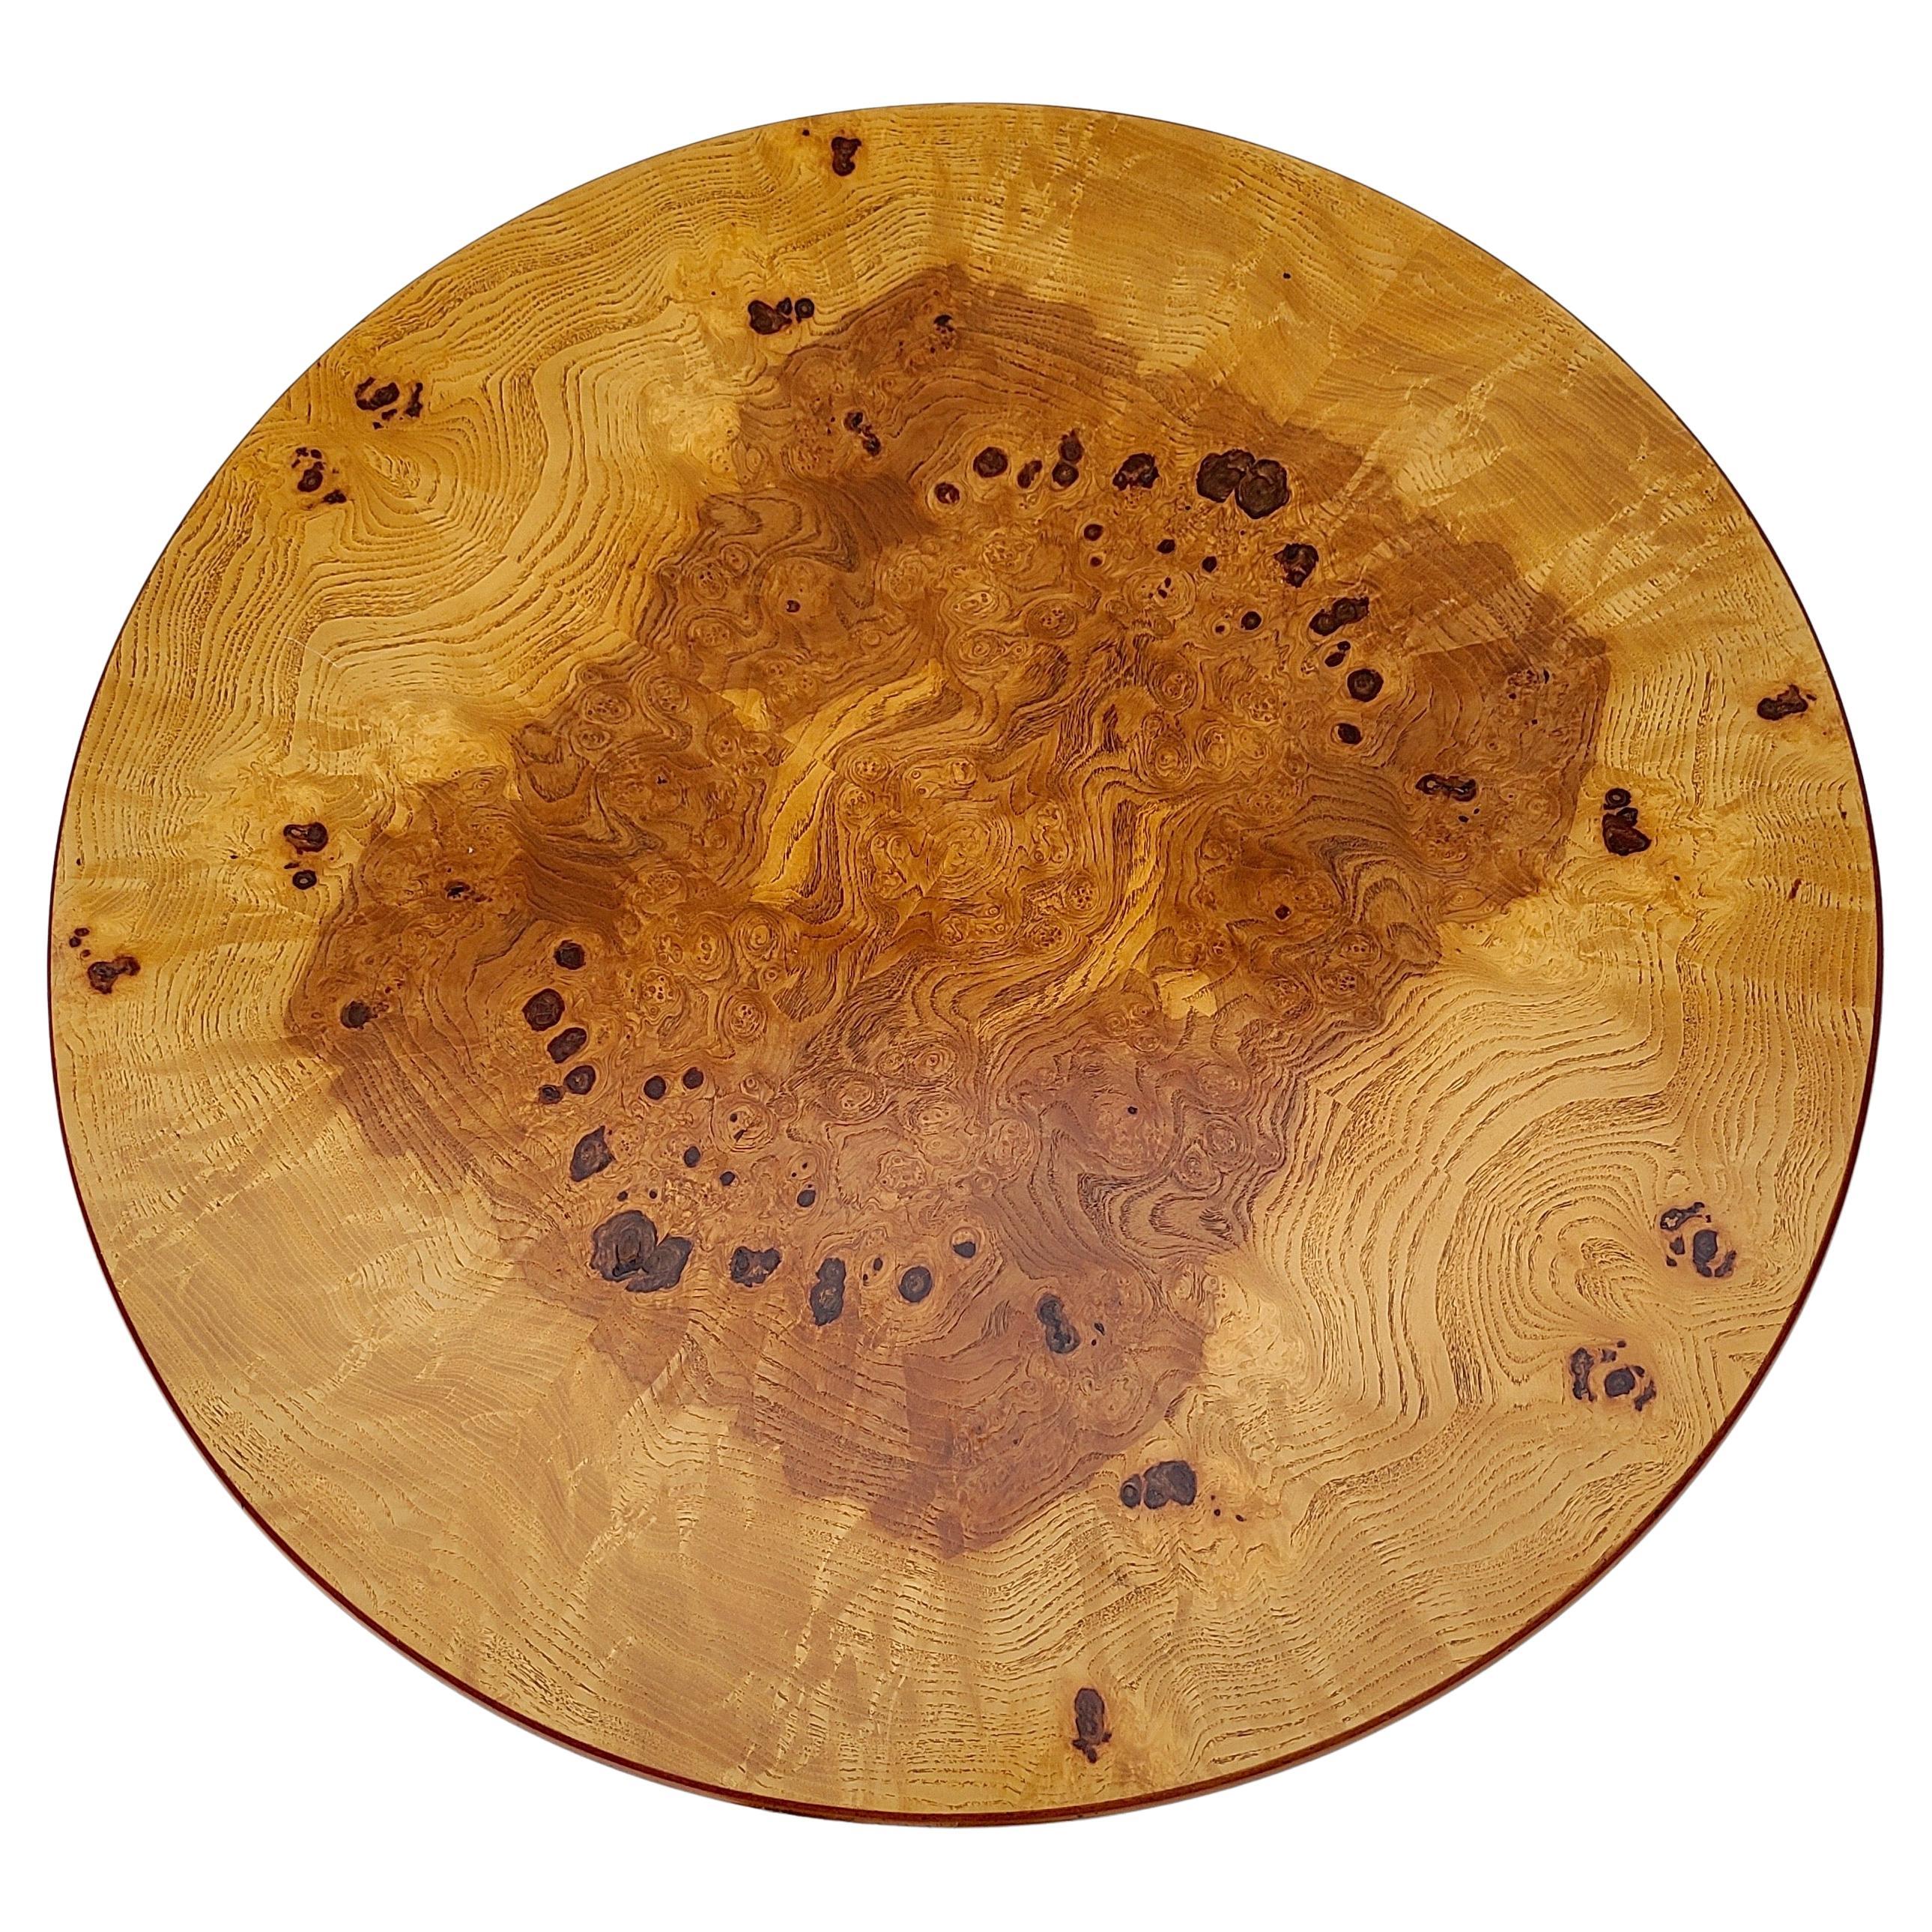 Please message us for a cost effective shipping quote to your location.

Cylinder side table in olivewood burl by Henredon.